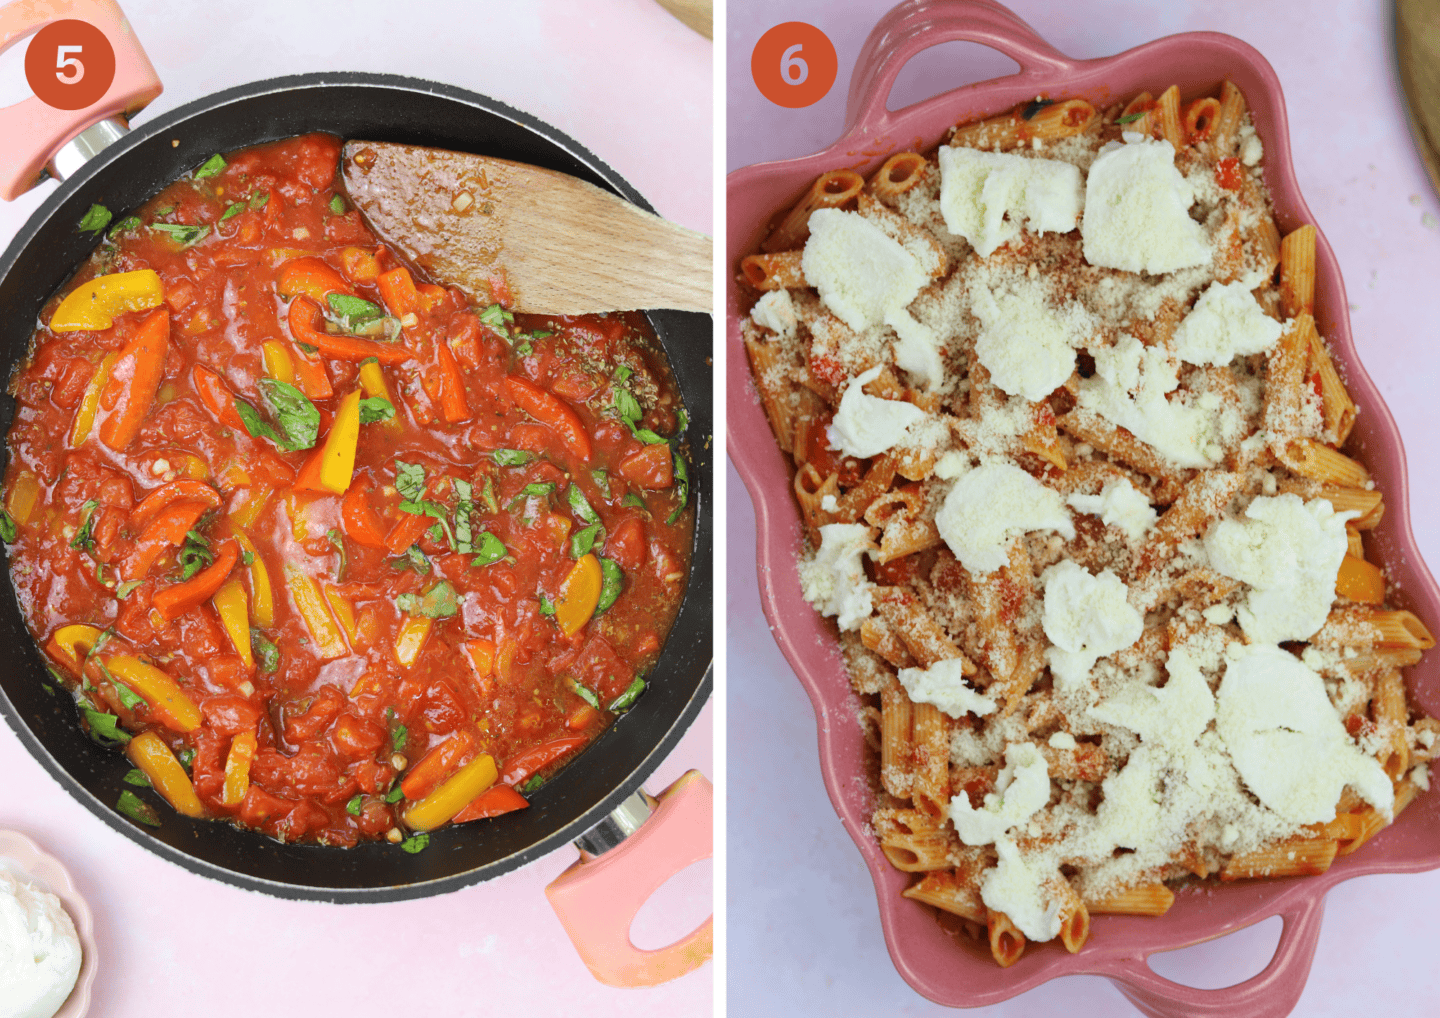 mix the cooked gluten free pasta into the sauce then bake with cheese on top.